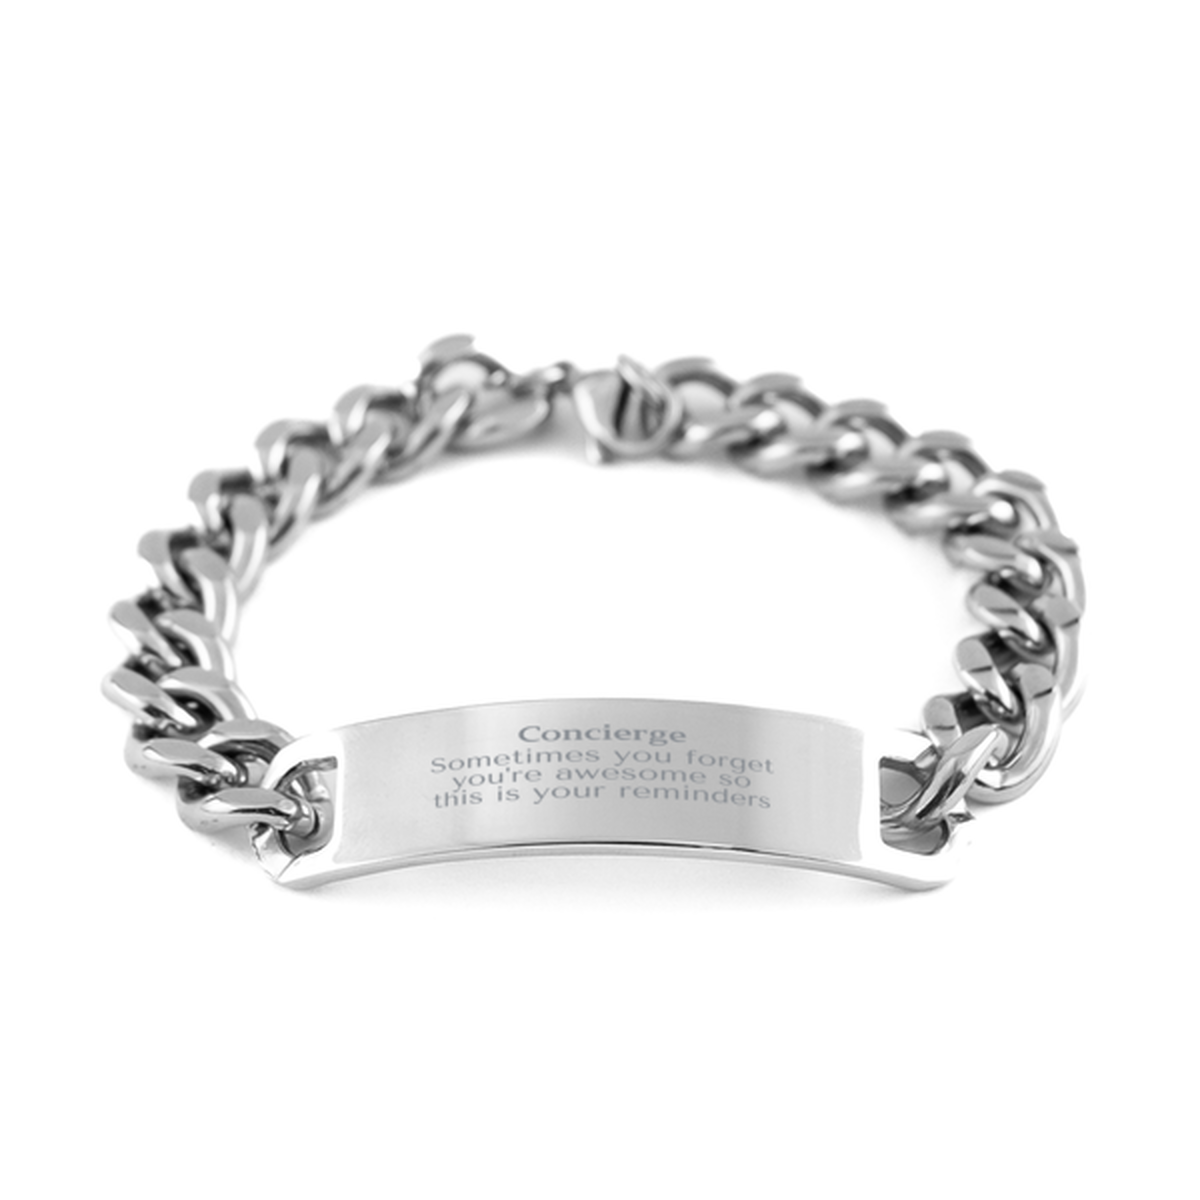 Sentimental Concierge Cuban Chain Stainless Steel Bracelet, Concierge Sometimes you forget you're awesome so this is your reminders, Graduation Christmas Birthday Gifts for Concierge, Men, Women, Coworkers